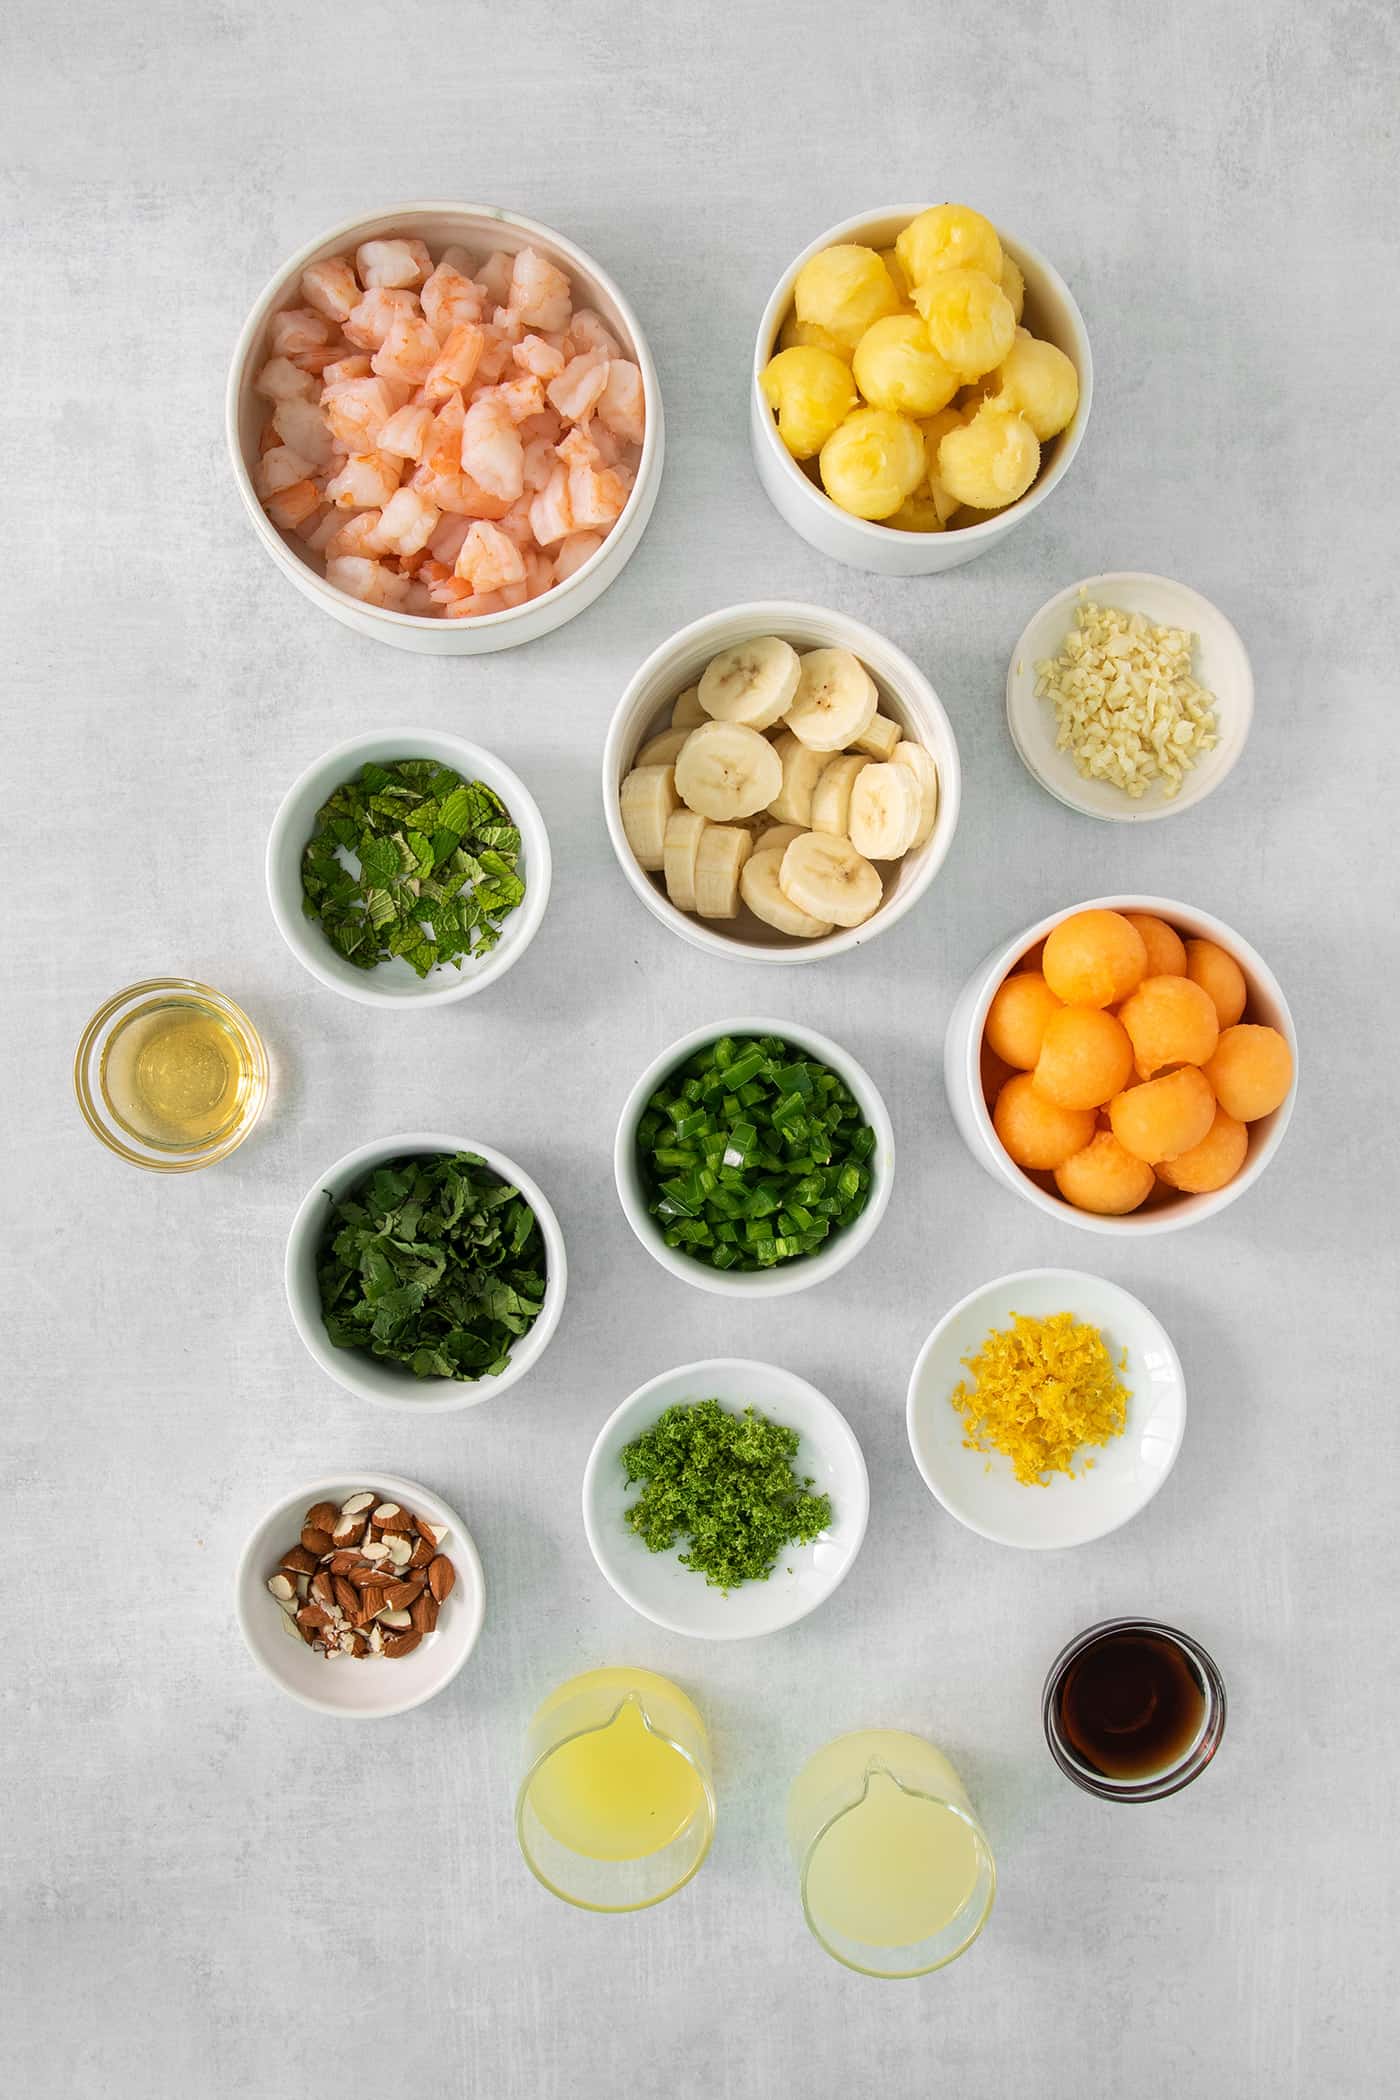 The ingredients needed to make tropical shrimp salad are shown in bowls, including melon balls, pineapple, banana slices, green onions, mint and cilantro, shrimp, and almonds.